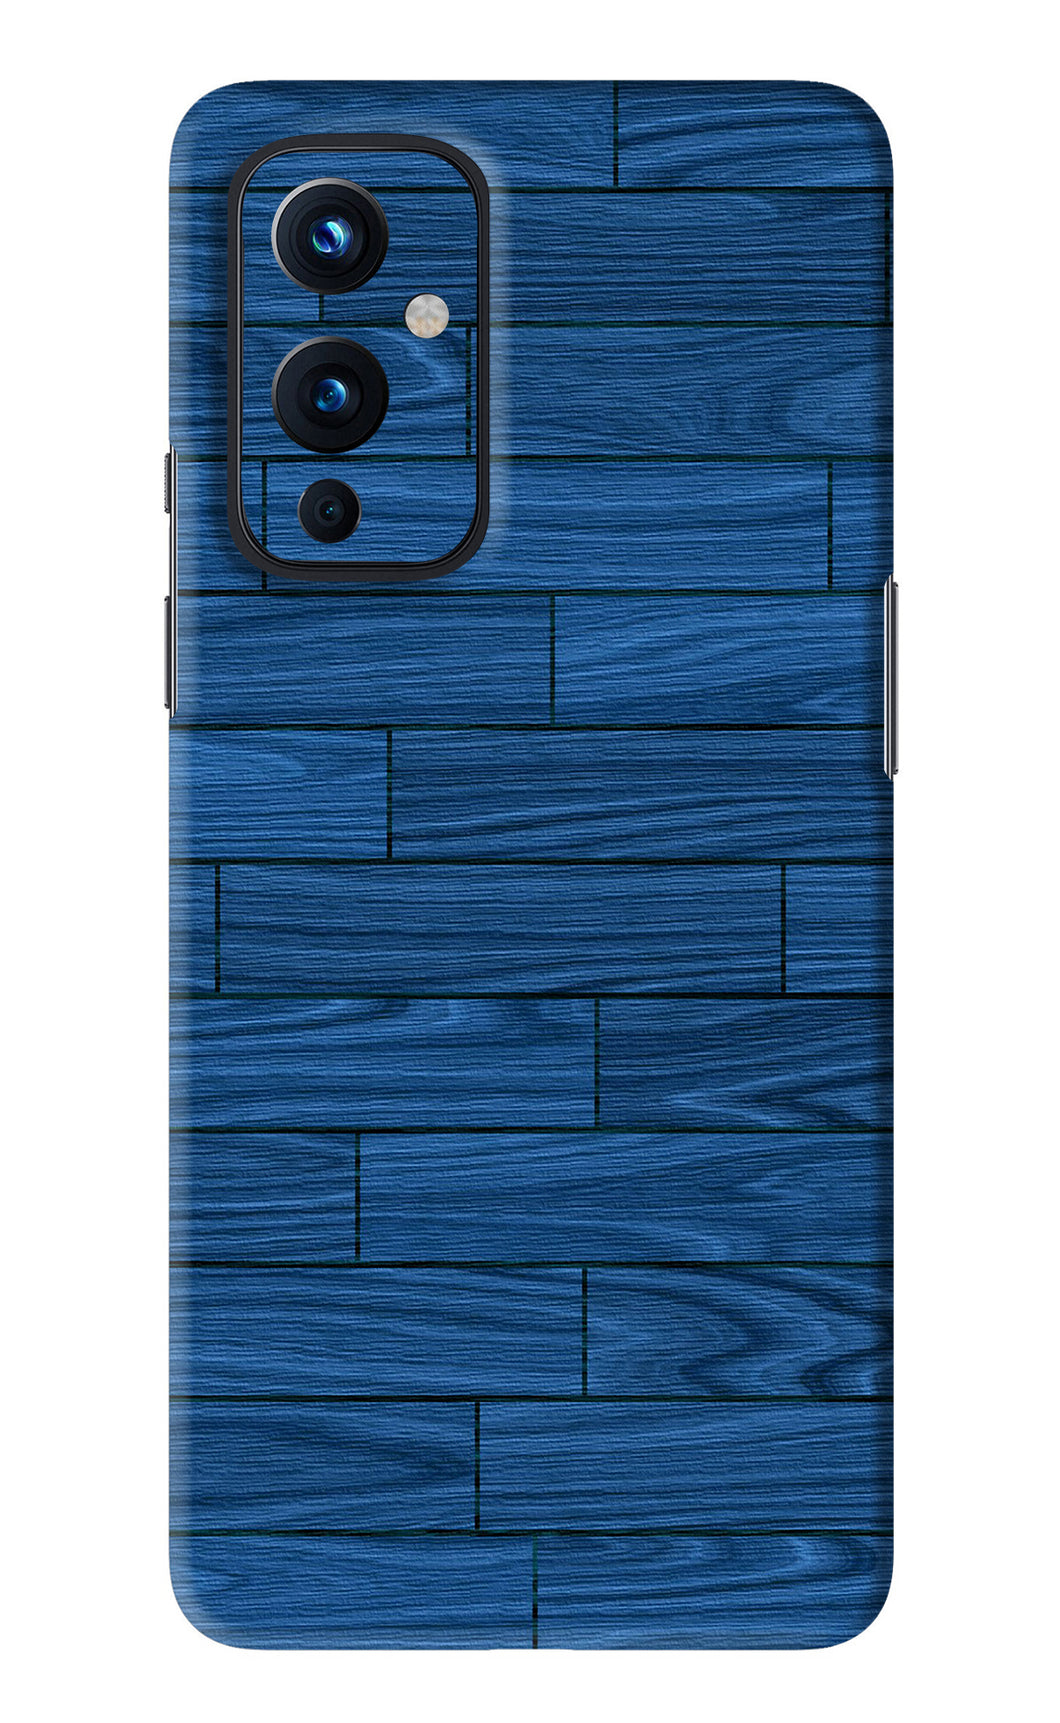 Blue Wooden Texture OnePlus 9 Back Skin Wrap